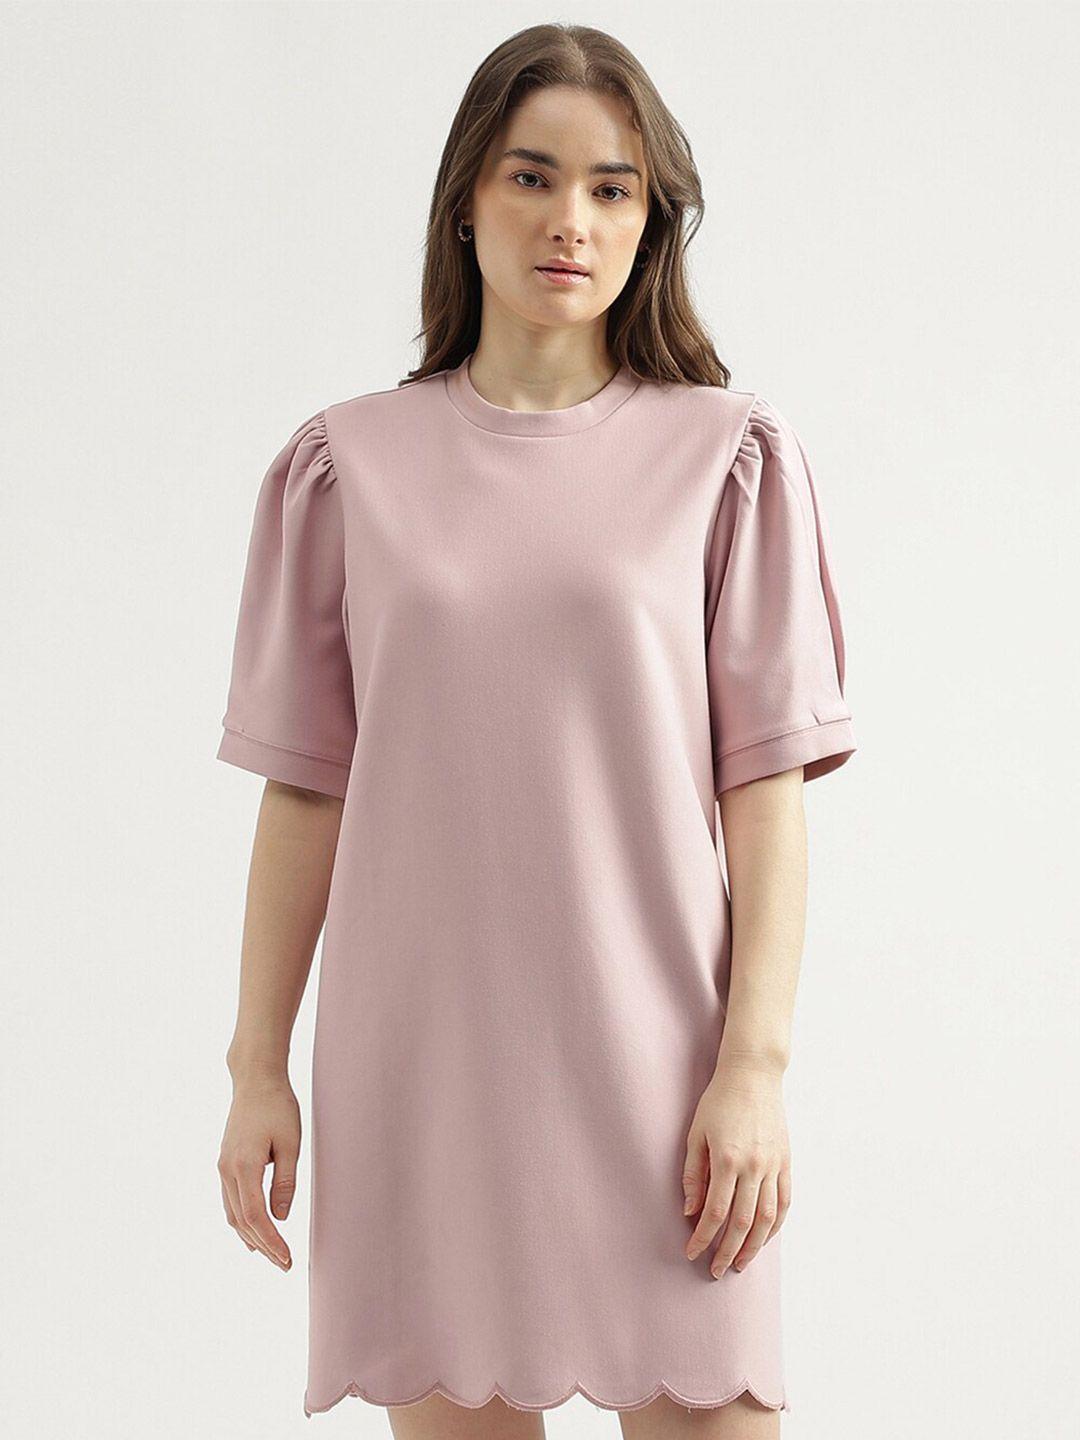 united-colors-of-benetton-puff-sleeves-scalloped-hem-a-line-dress